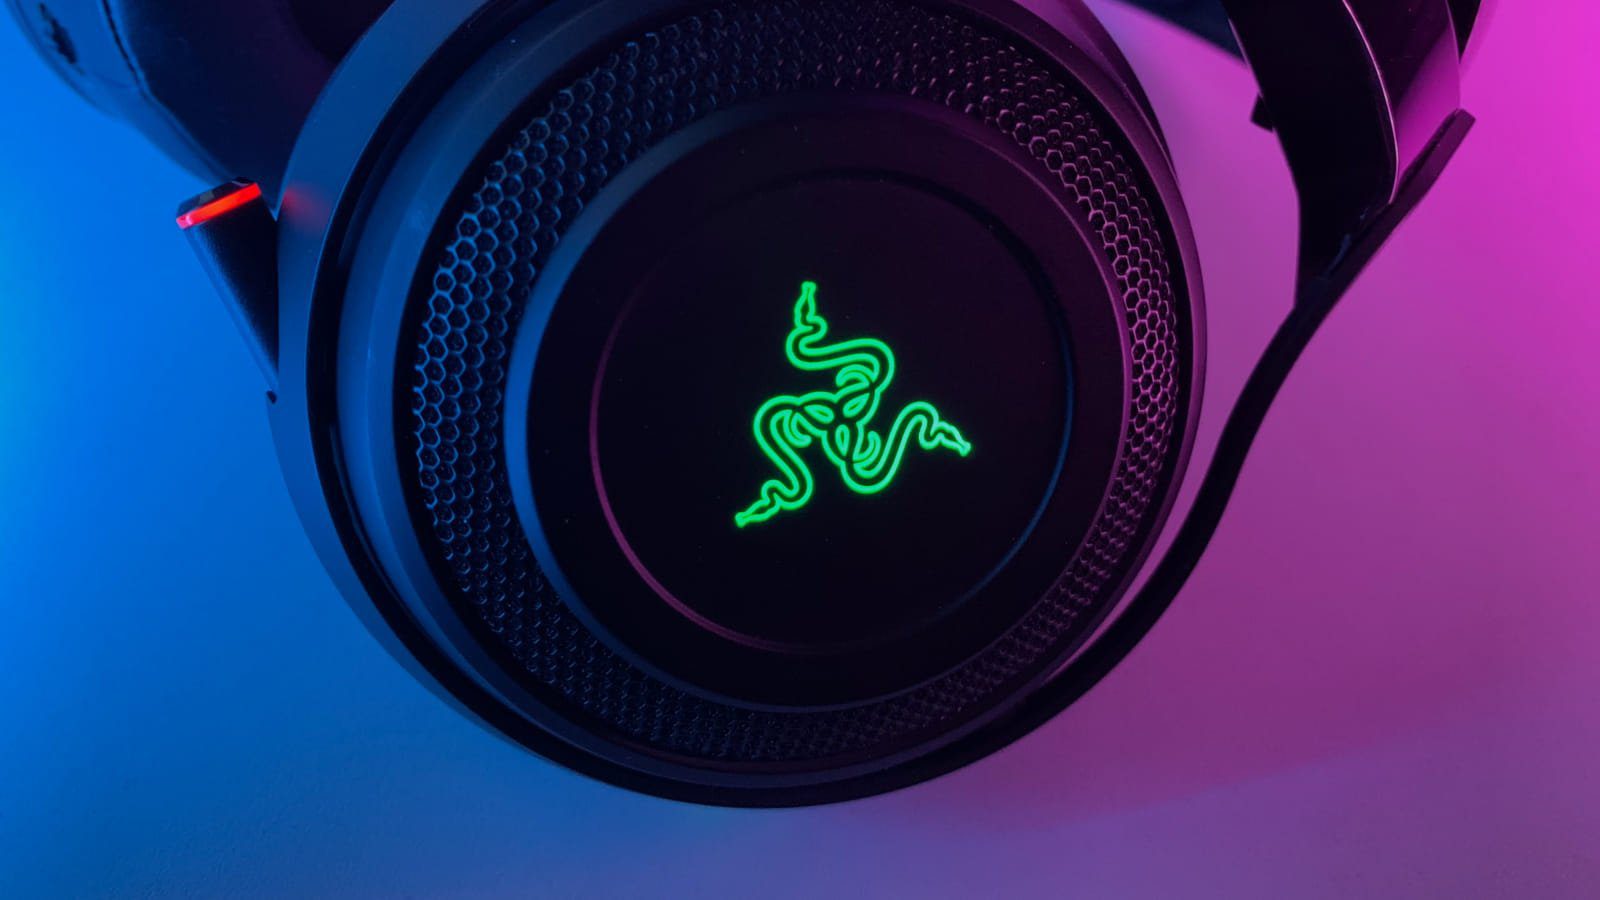 Razer investigates data breach claims, resets user sessions – Source: www.bleepingcomputer.com